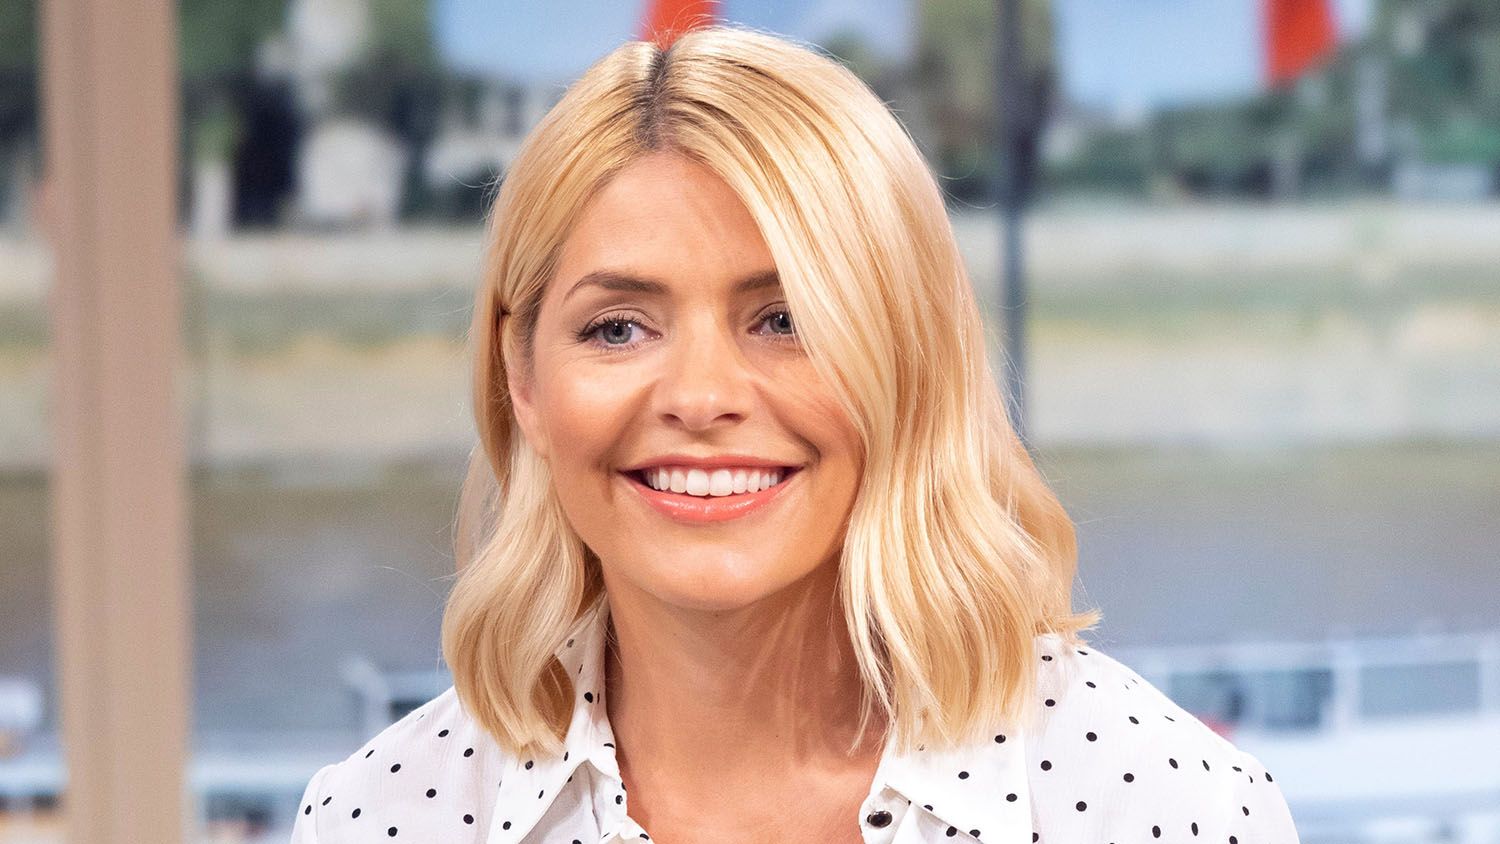 Celebrities from Holly Willoughby to Emma Willis who appeared in